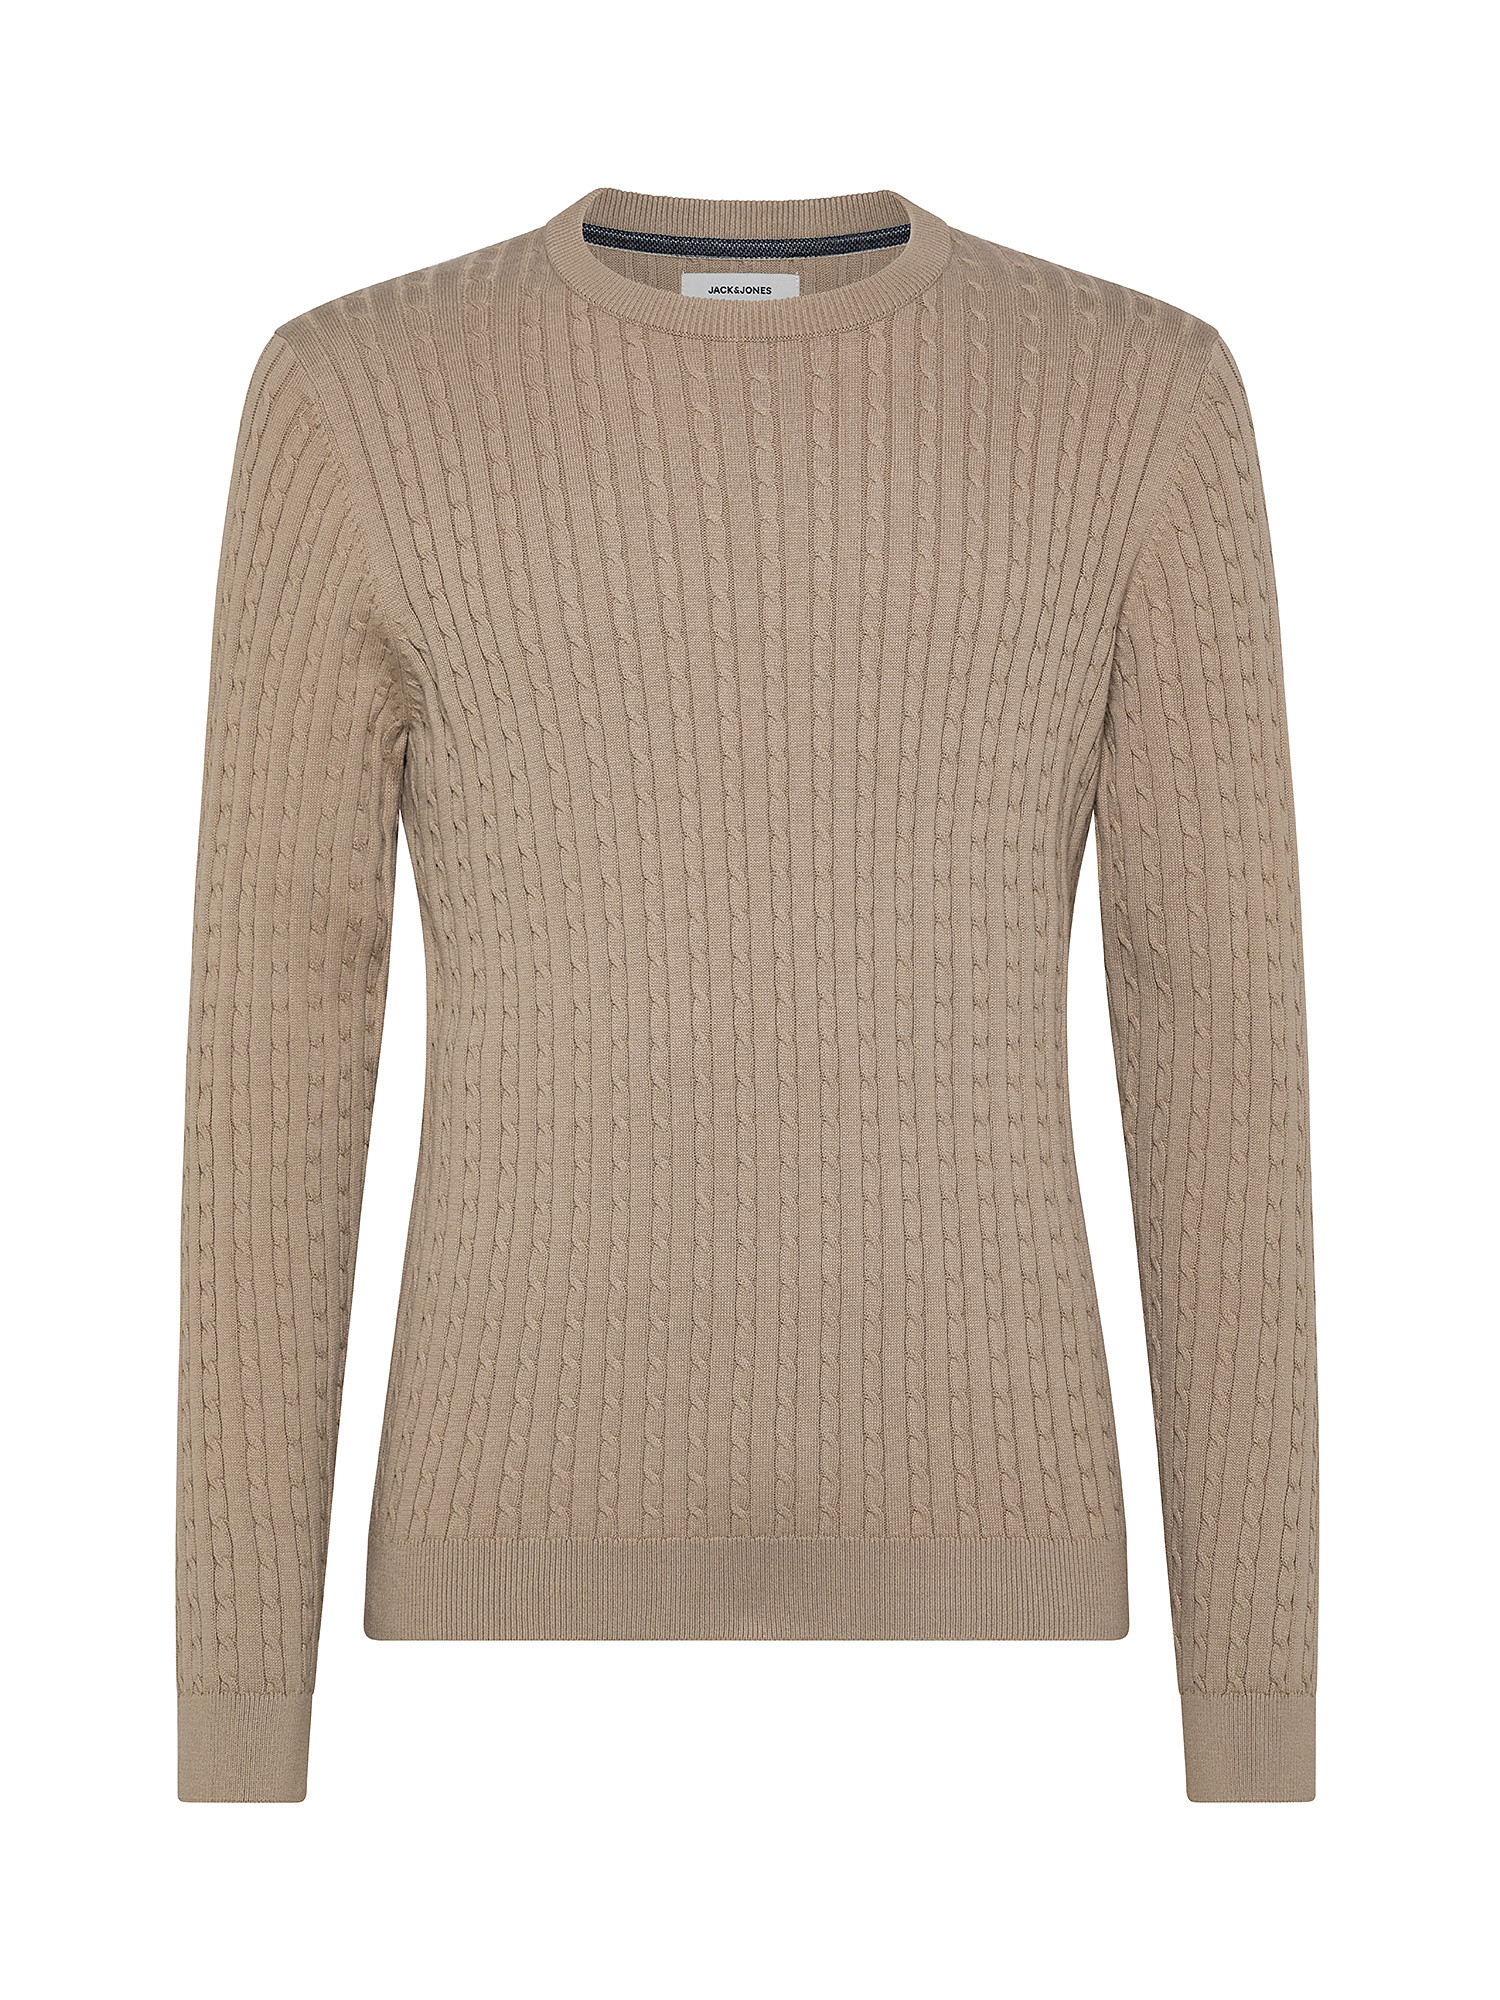 Maglione Girocollo, Beige, large image number 0